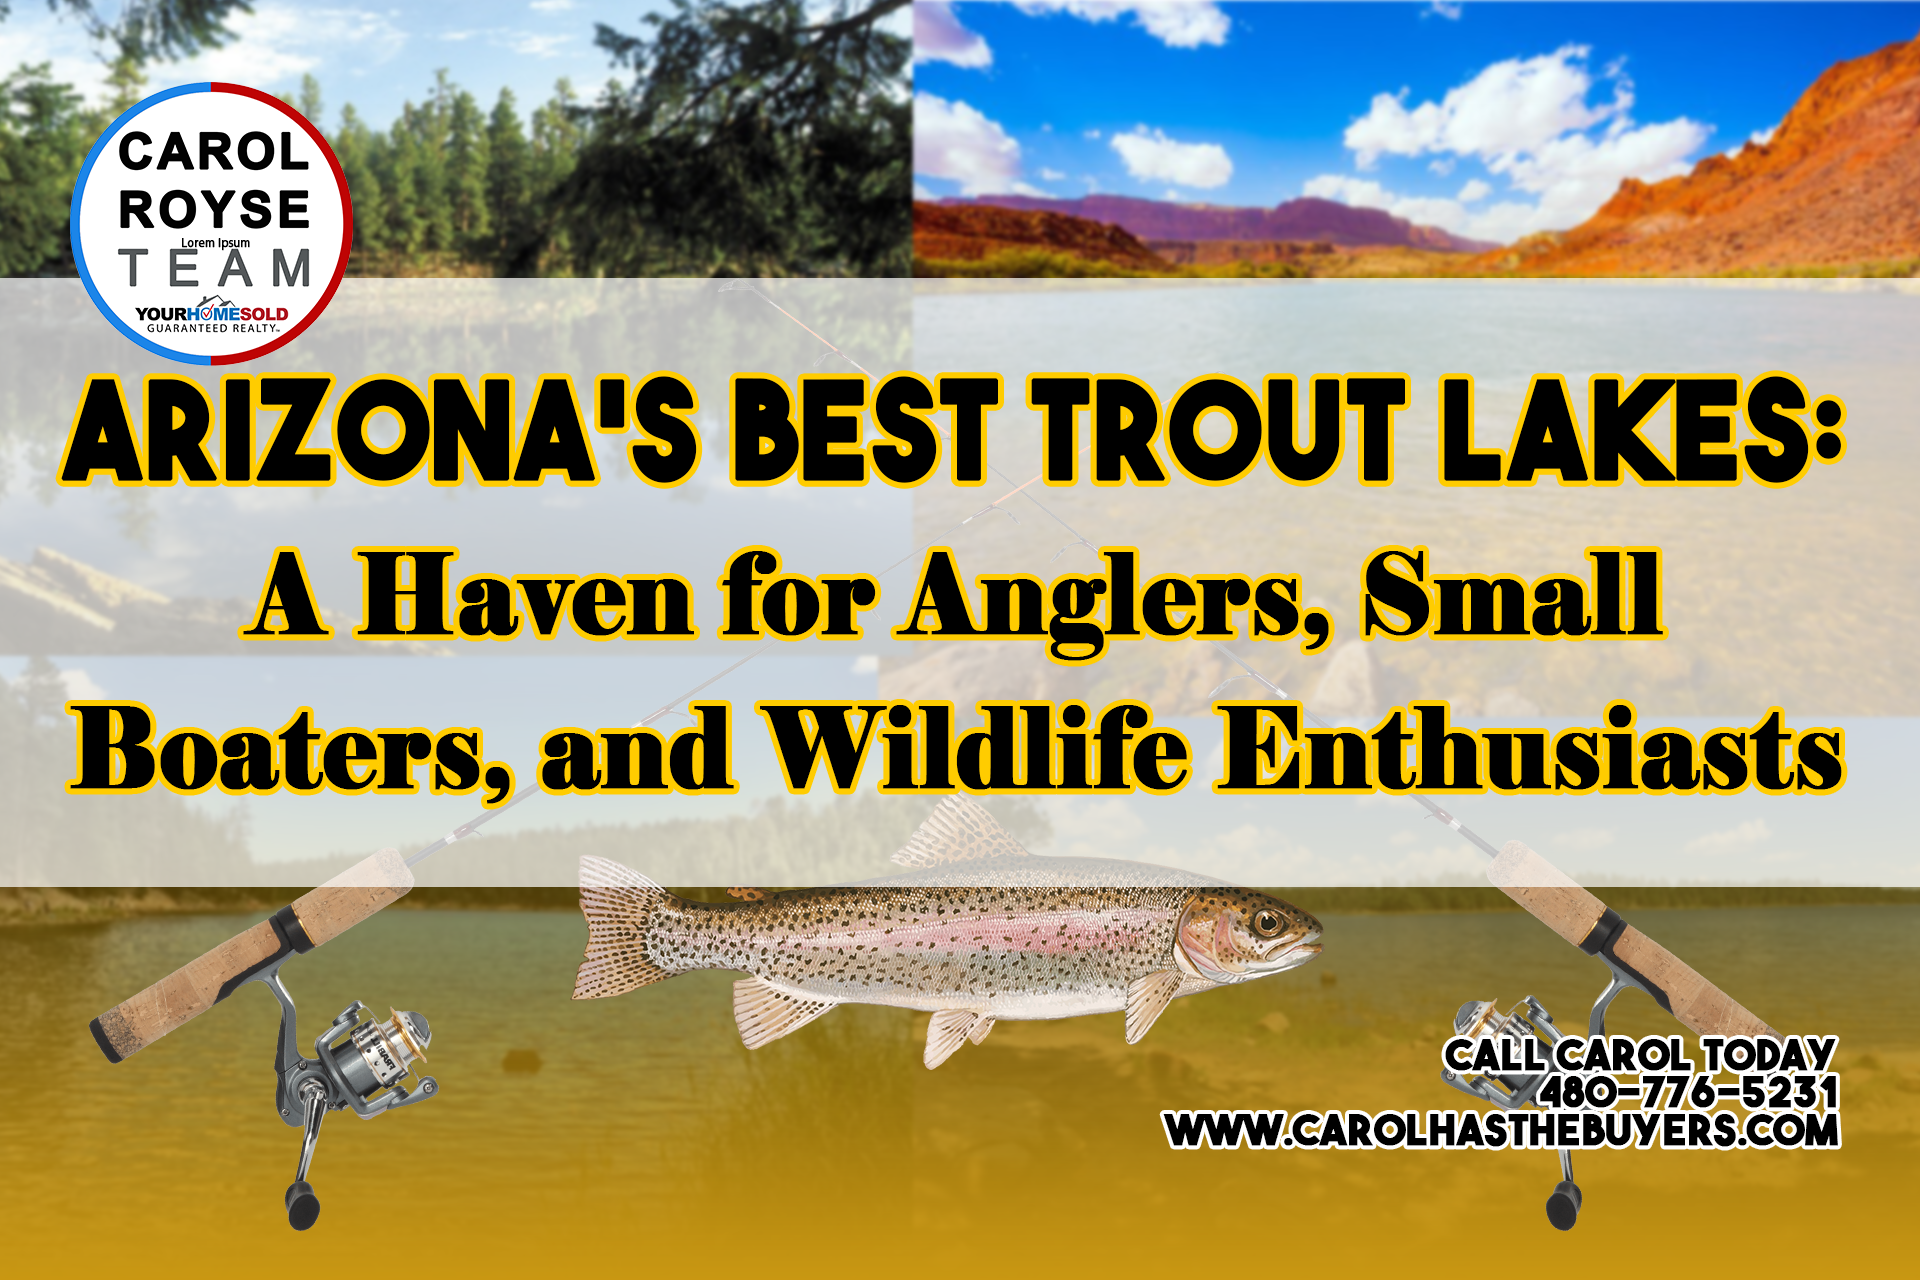 Arizona’s Best Trout Lakes: A Haven for Anglers, Small Boaters, and Wildlife Enthusiasts